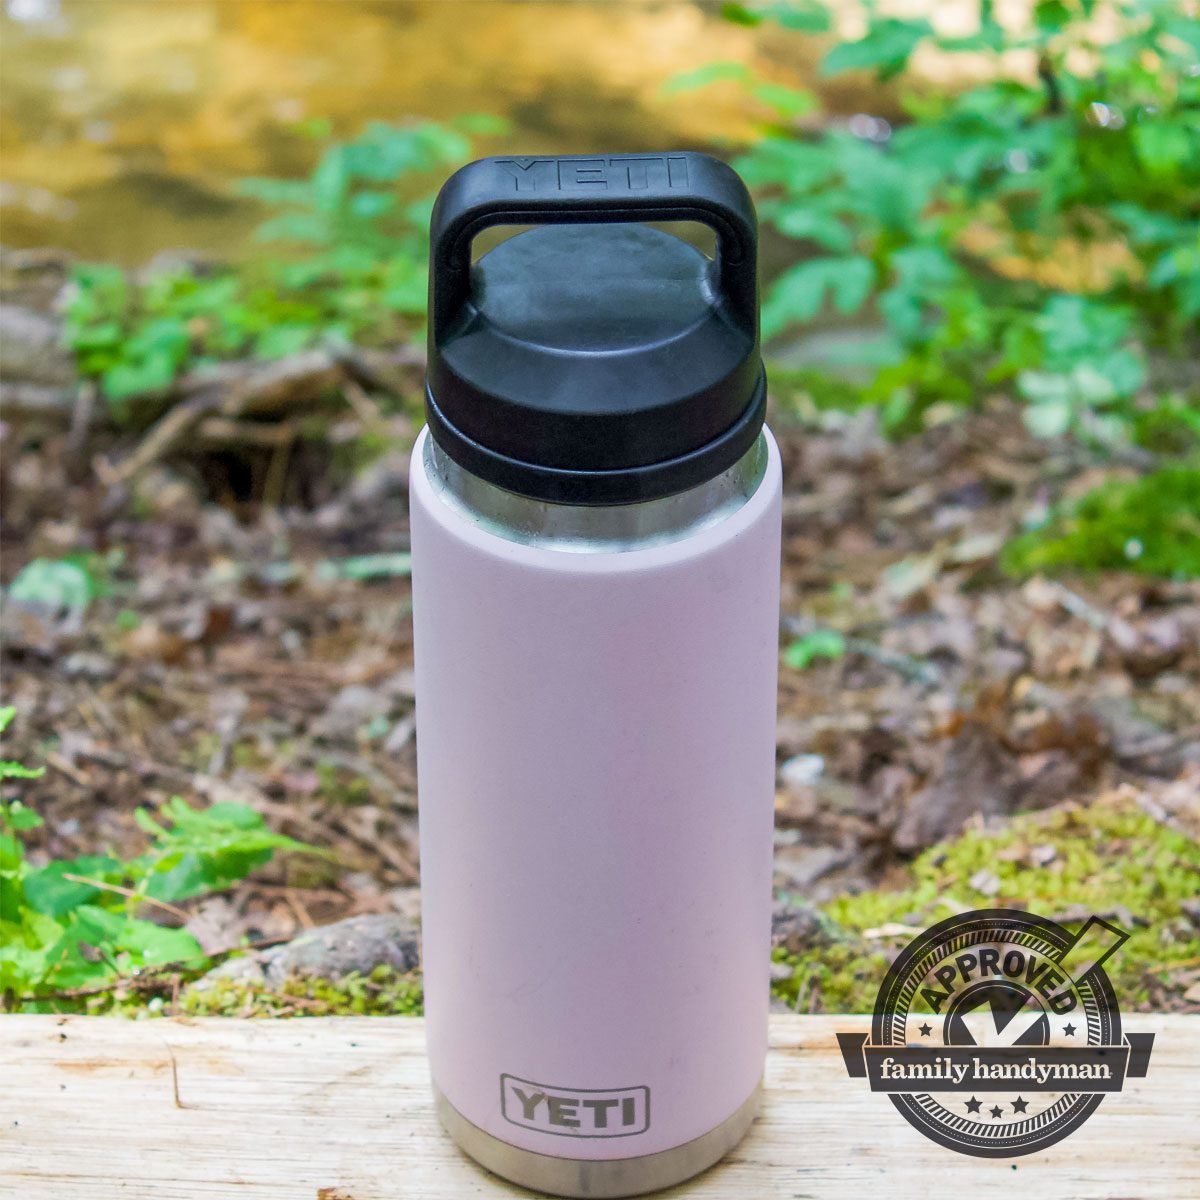 https://www.familyhandyman.com/wp-content/uploads/2023/08/FHM-The-9-Best-Yeti-Products-Our-Editors-Tested-and-Loved-Yeti-Rambler-26-Ounce-Water-Bottle-Mary-Henn-Family-Handyman-Daria-yeti-water-bottle_KSedit.jpg?fit=700%2C700